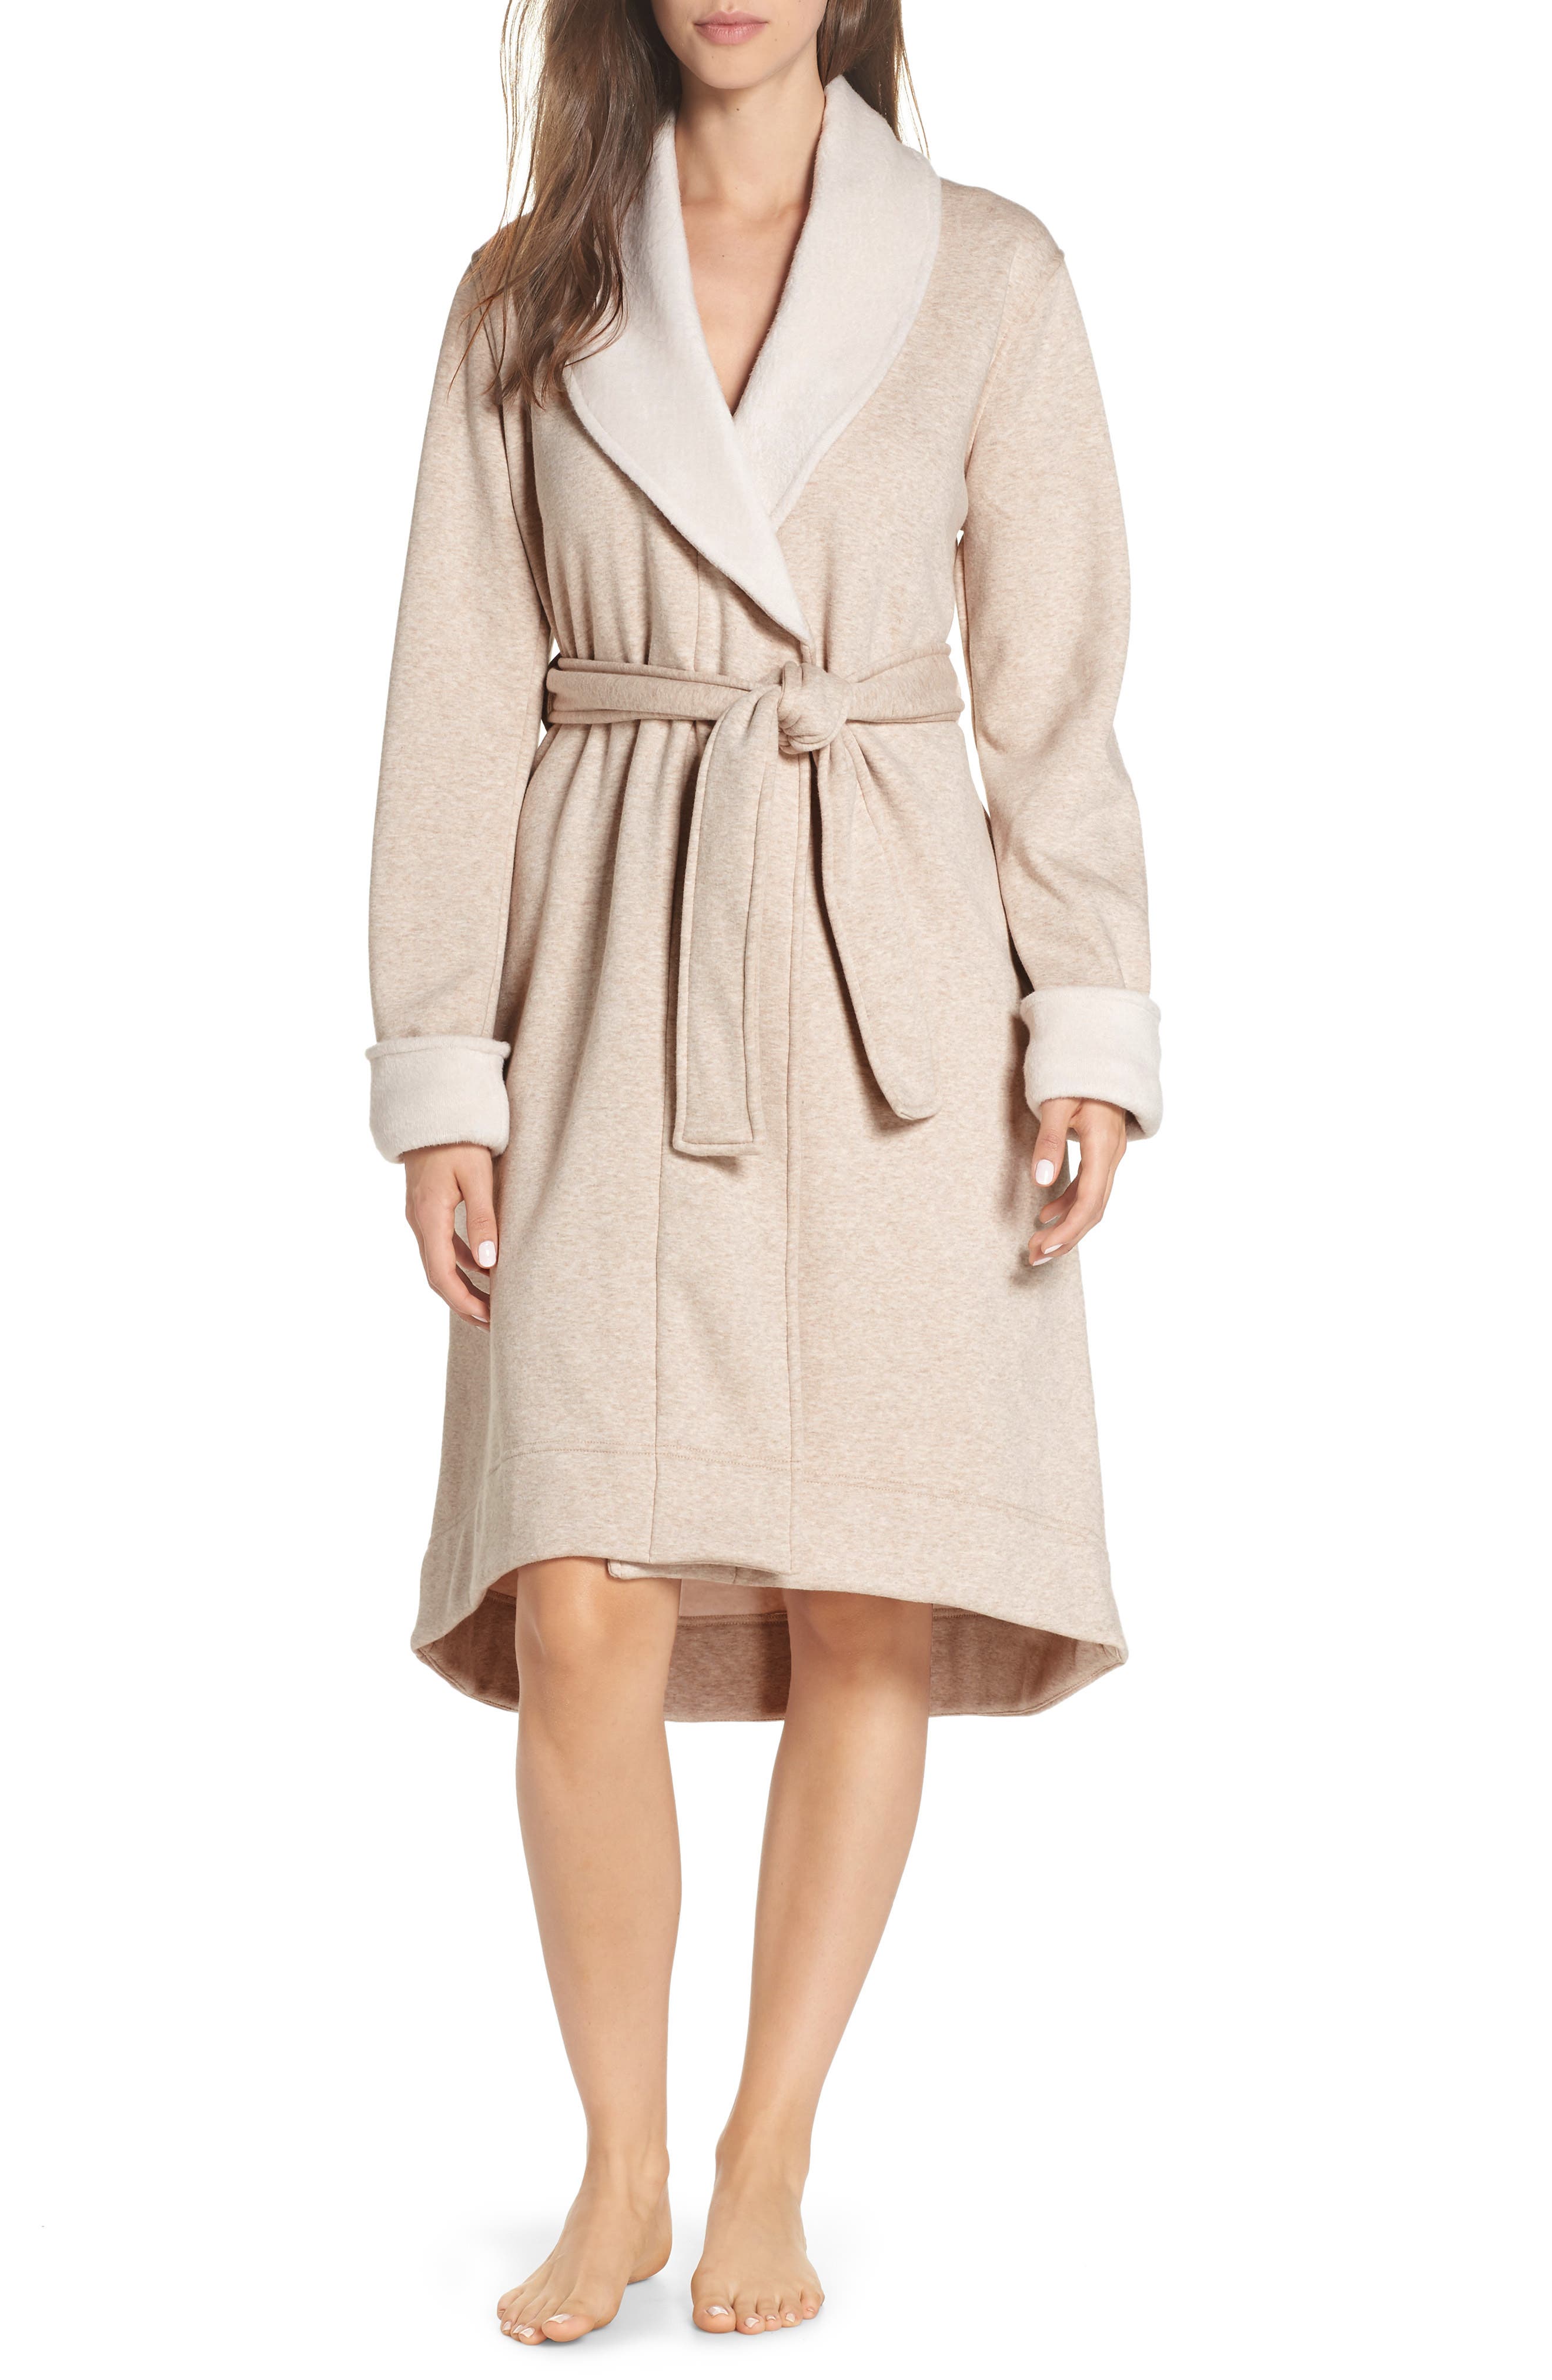 womens ugg dressing gown